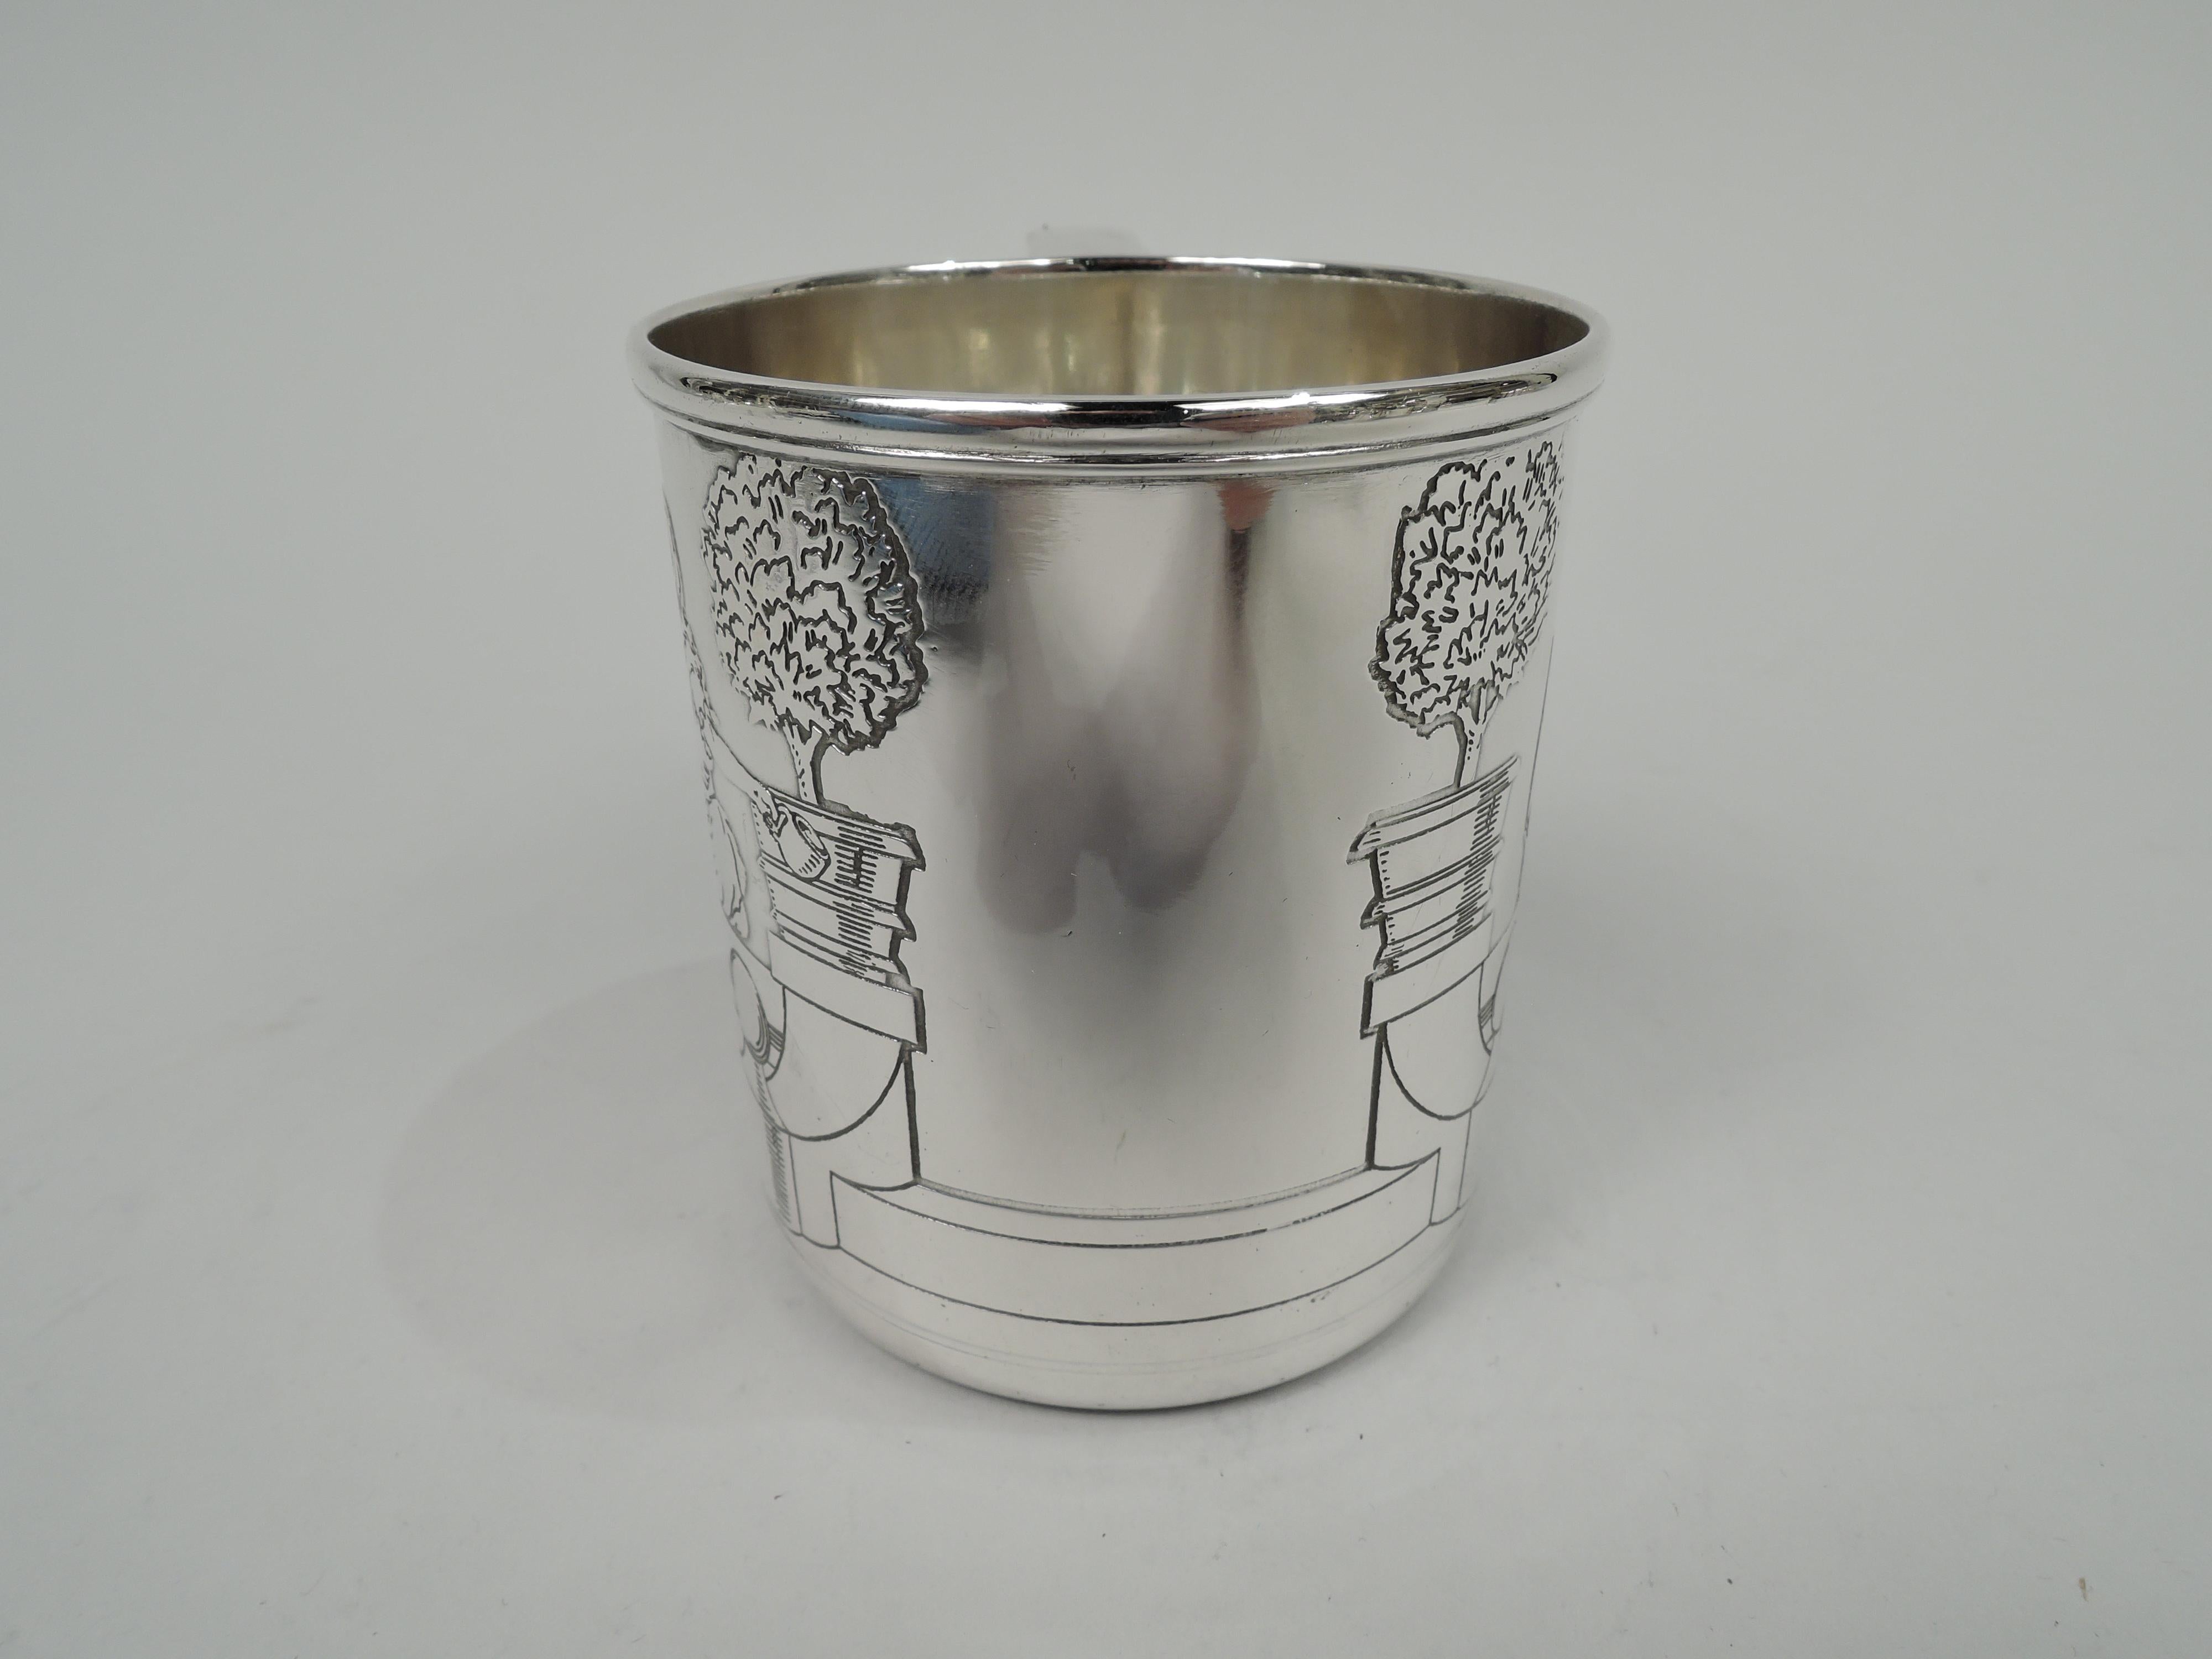 Art Deco sterling silver pictorial baby cup. Made by Tiffany & Co. in New York, ca 1920. Straight sides, molded rim, and scroll bracket handle. Acid-etched scene: A boy and girl perch on top a terrace wall. The boy baits the dog with a treat. The